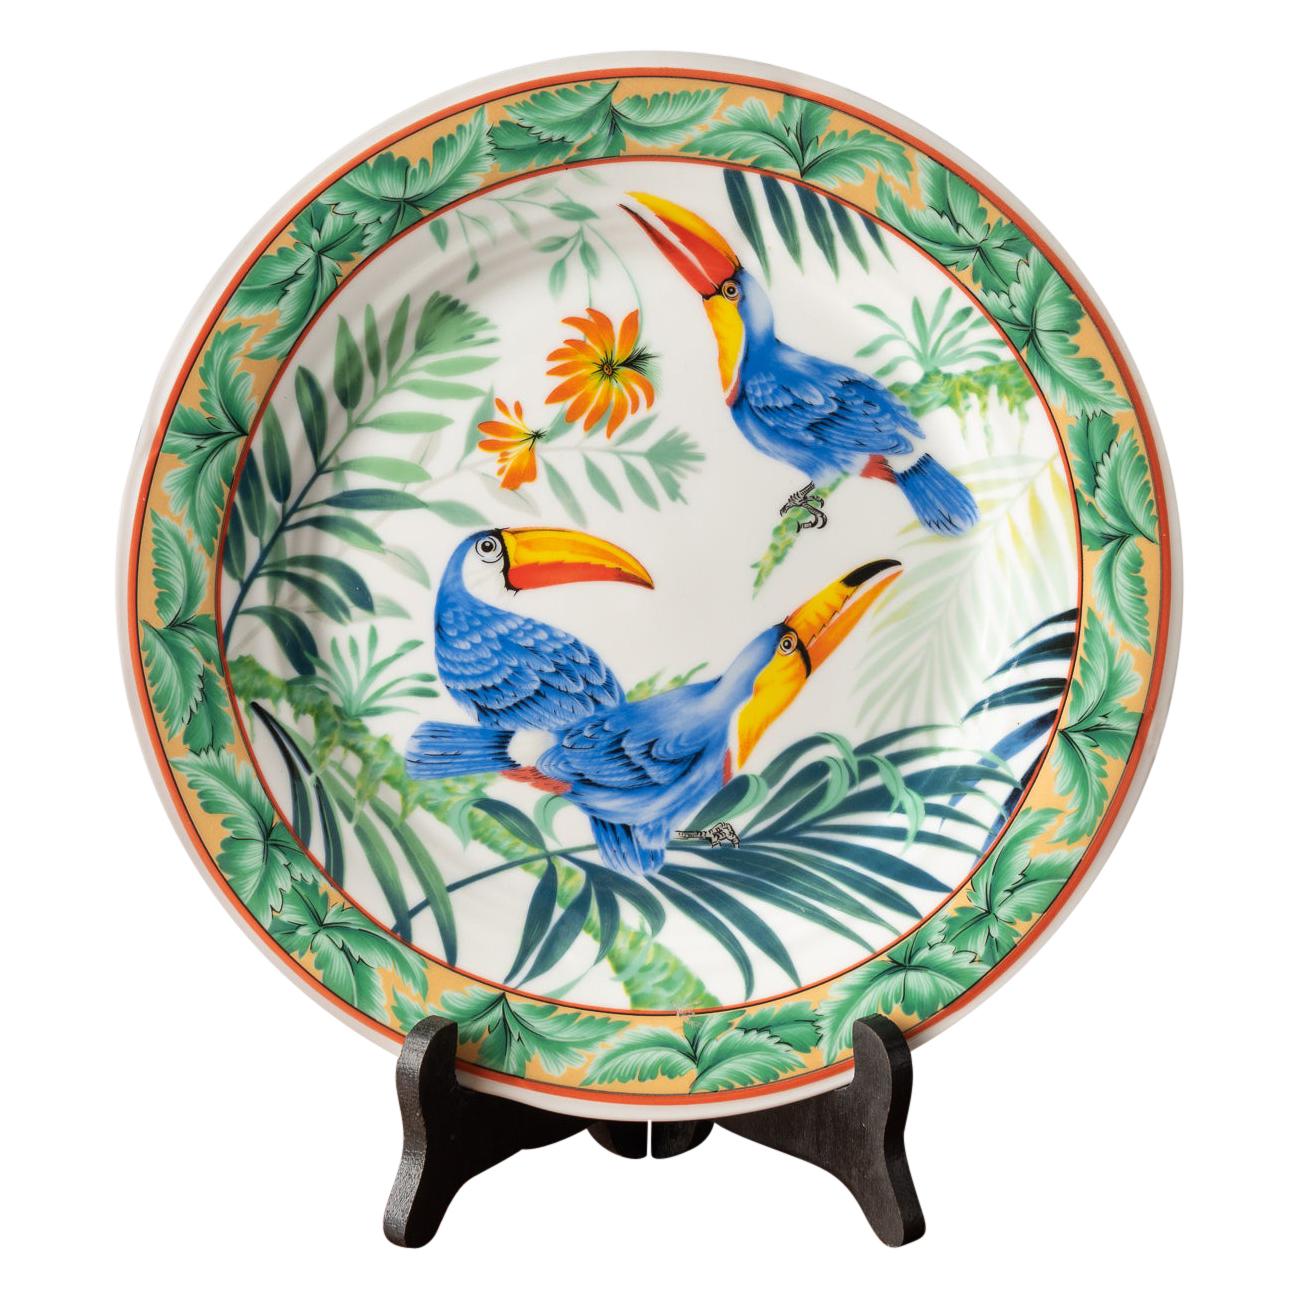 Beautiful Plate Made in Japan with Two Tropical Birds in a Forest